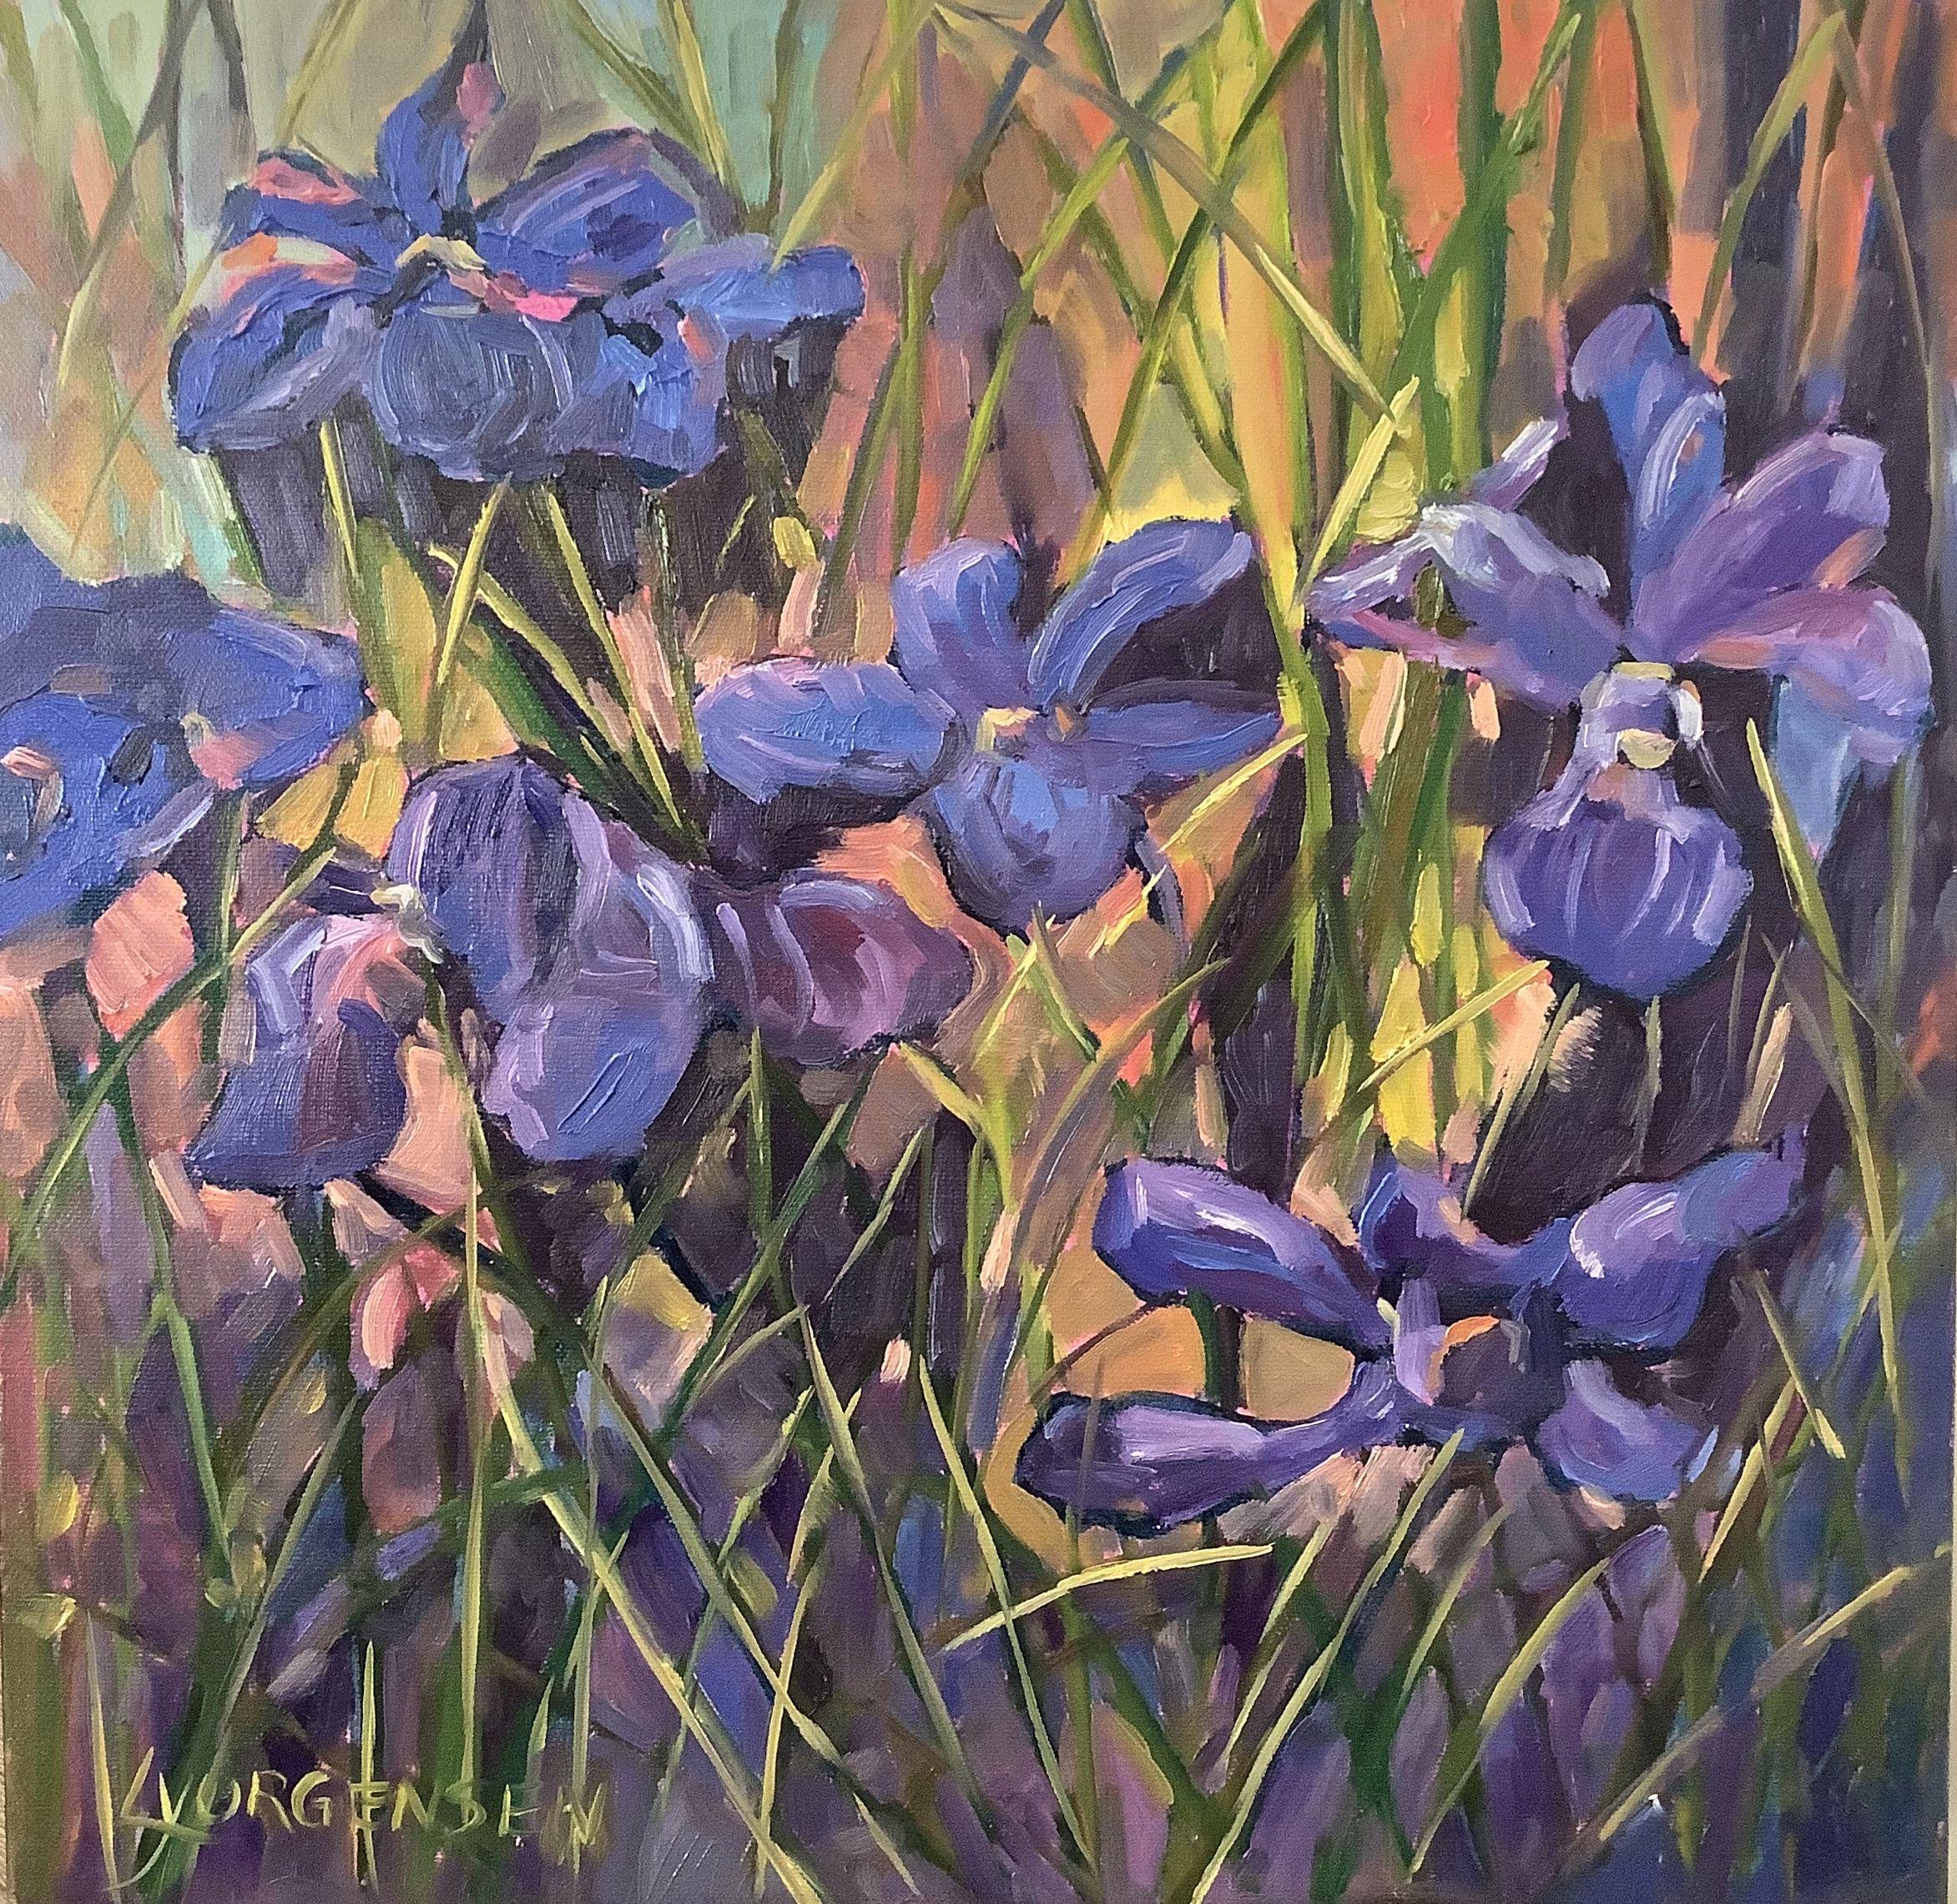 The irises in my garden were extraordinary this past summer and I have high hopes for this year as well.  The colors in the piece are vibrant and there is a lot of texture on the gallery wrapped canvas.  The sides of the canvas have been painted to